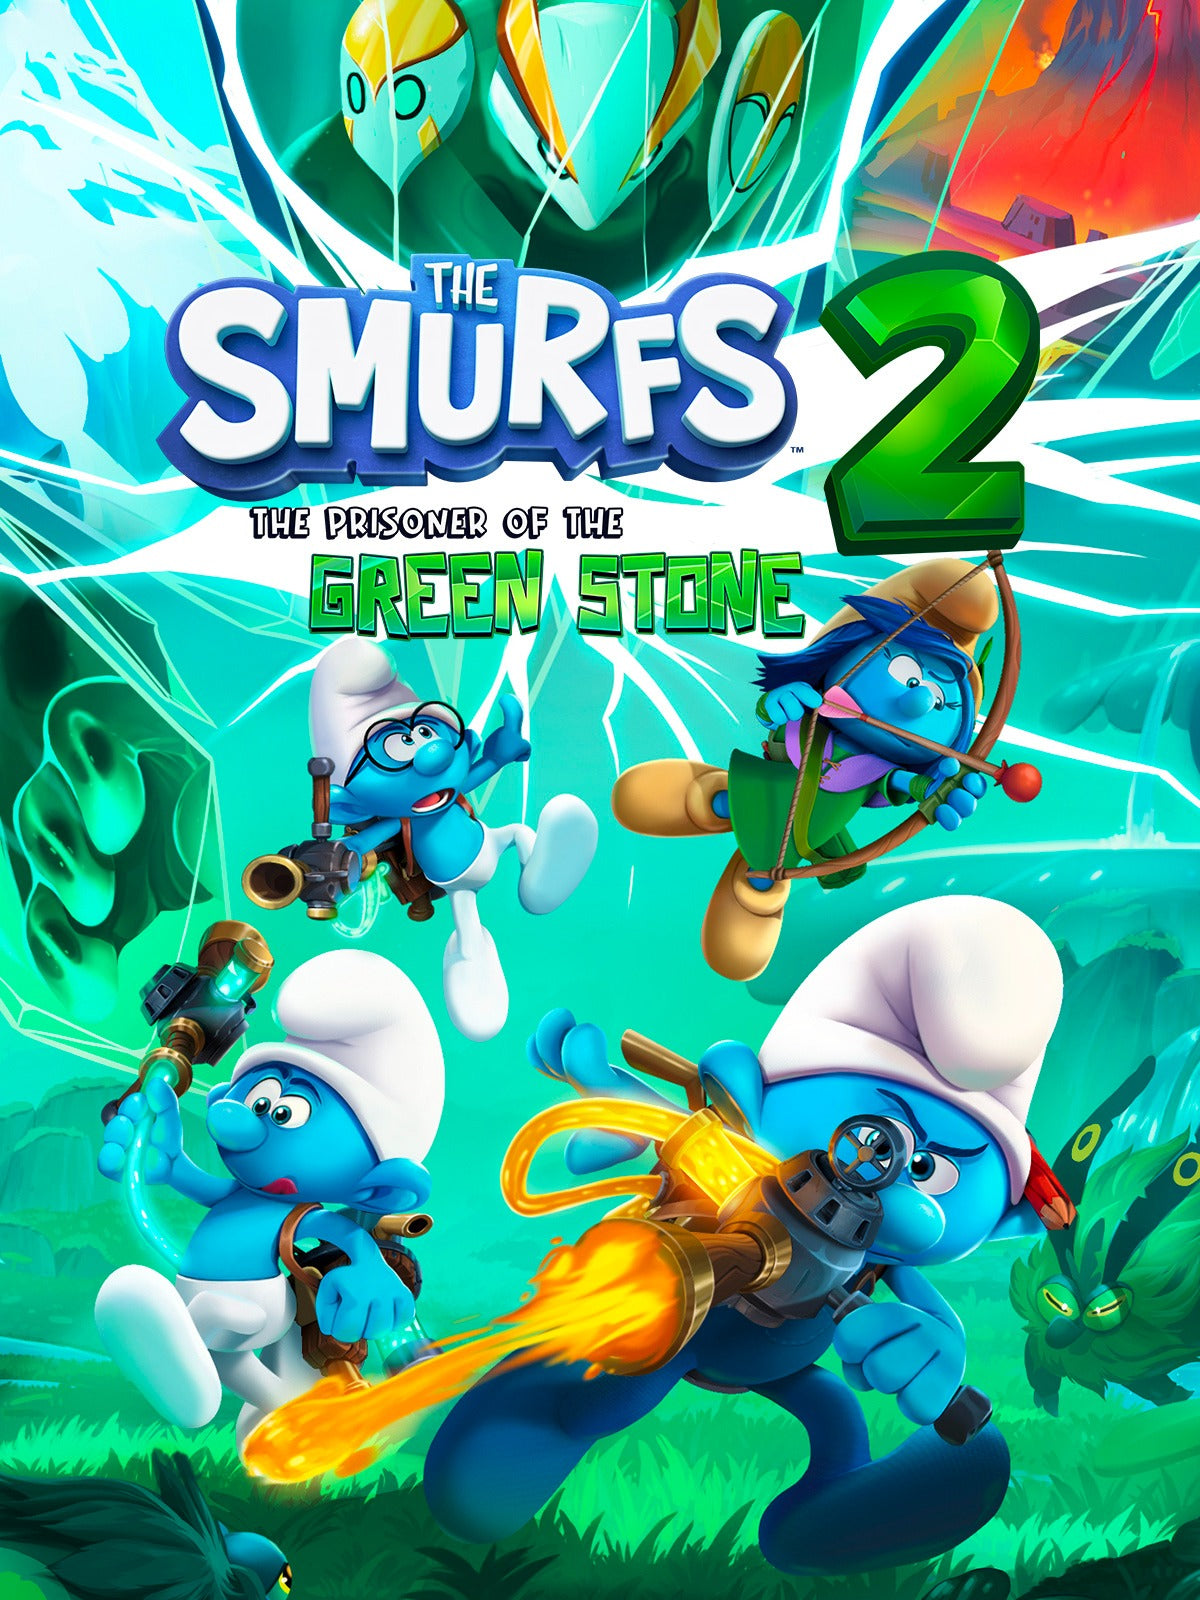 The Smurfs 2 - The Prisoner of the Green Stone (Standard Edition) - PlayStation | PS